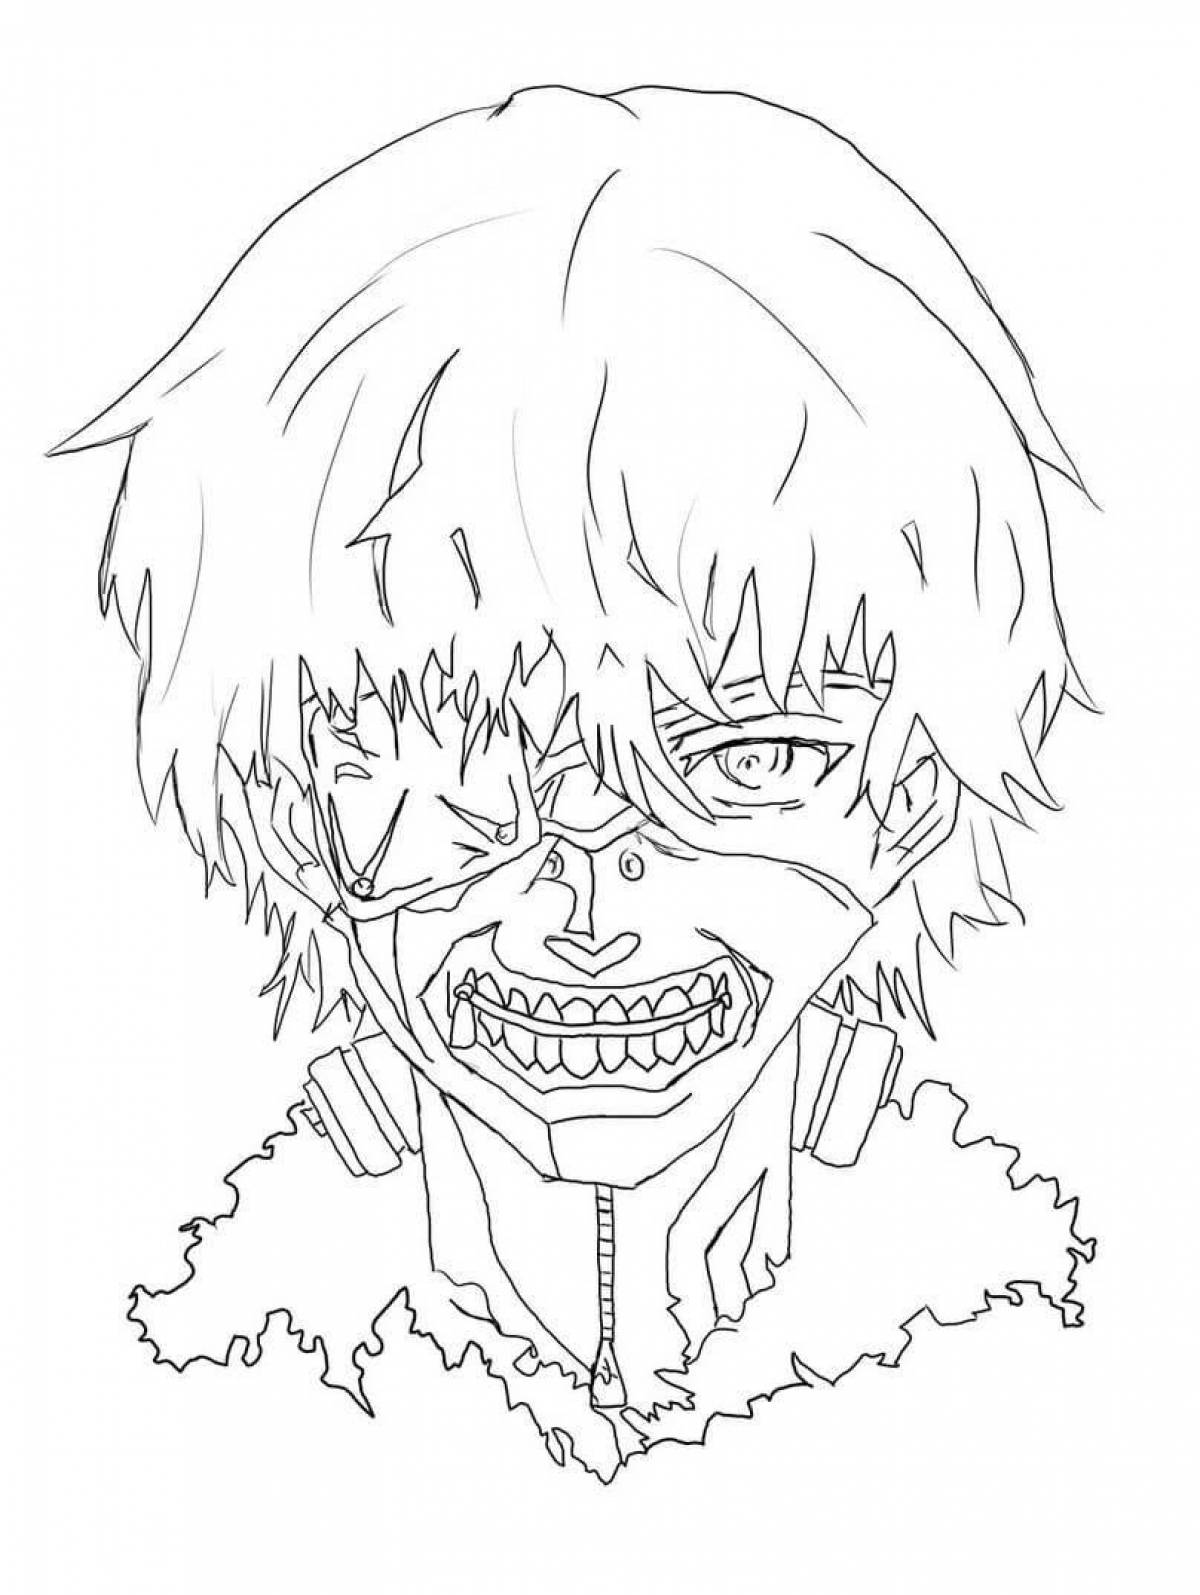 Awesome anime ghoul coloring page